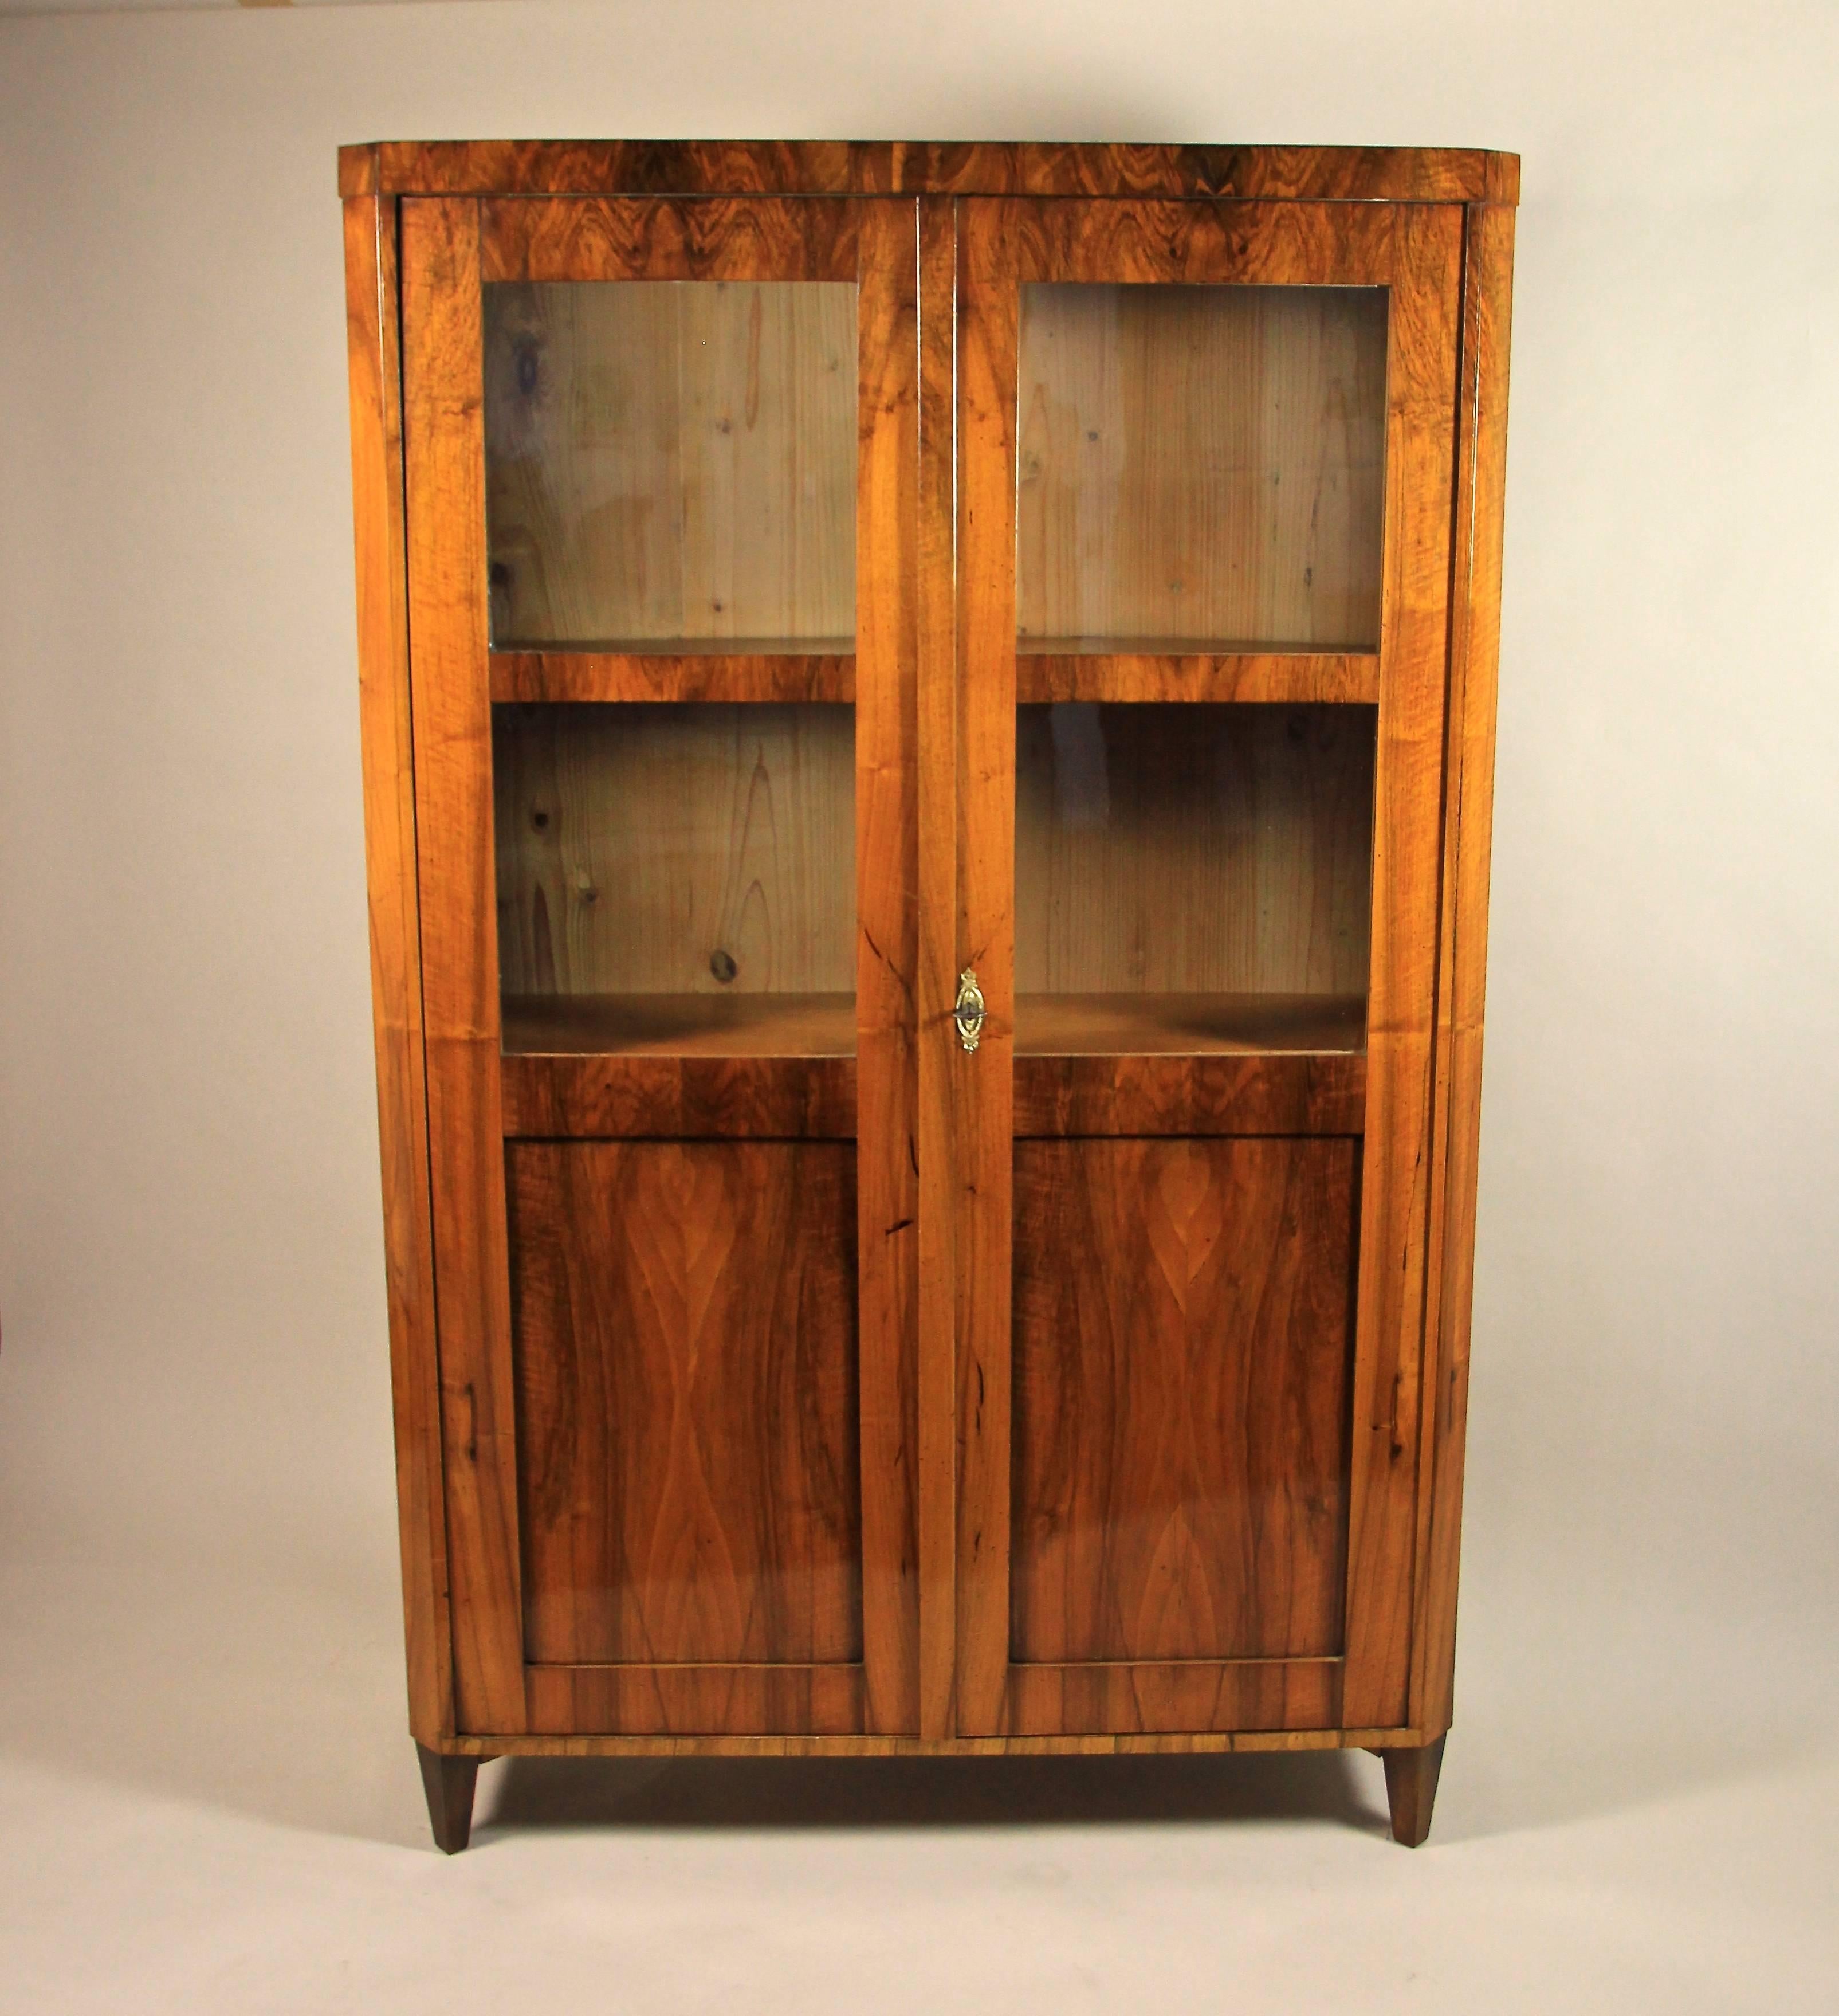 Fine Biedermeier bookcase veneered in wonderful burr walnut wood that shows an amazing veneer picture from the top down to the floor. The front of this Biedermeier Bookcase features two doors with two glass panels each. And please also note that